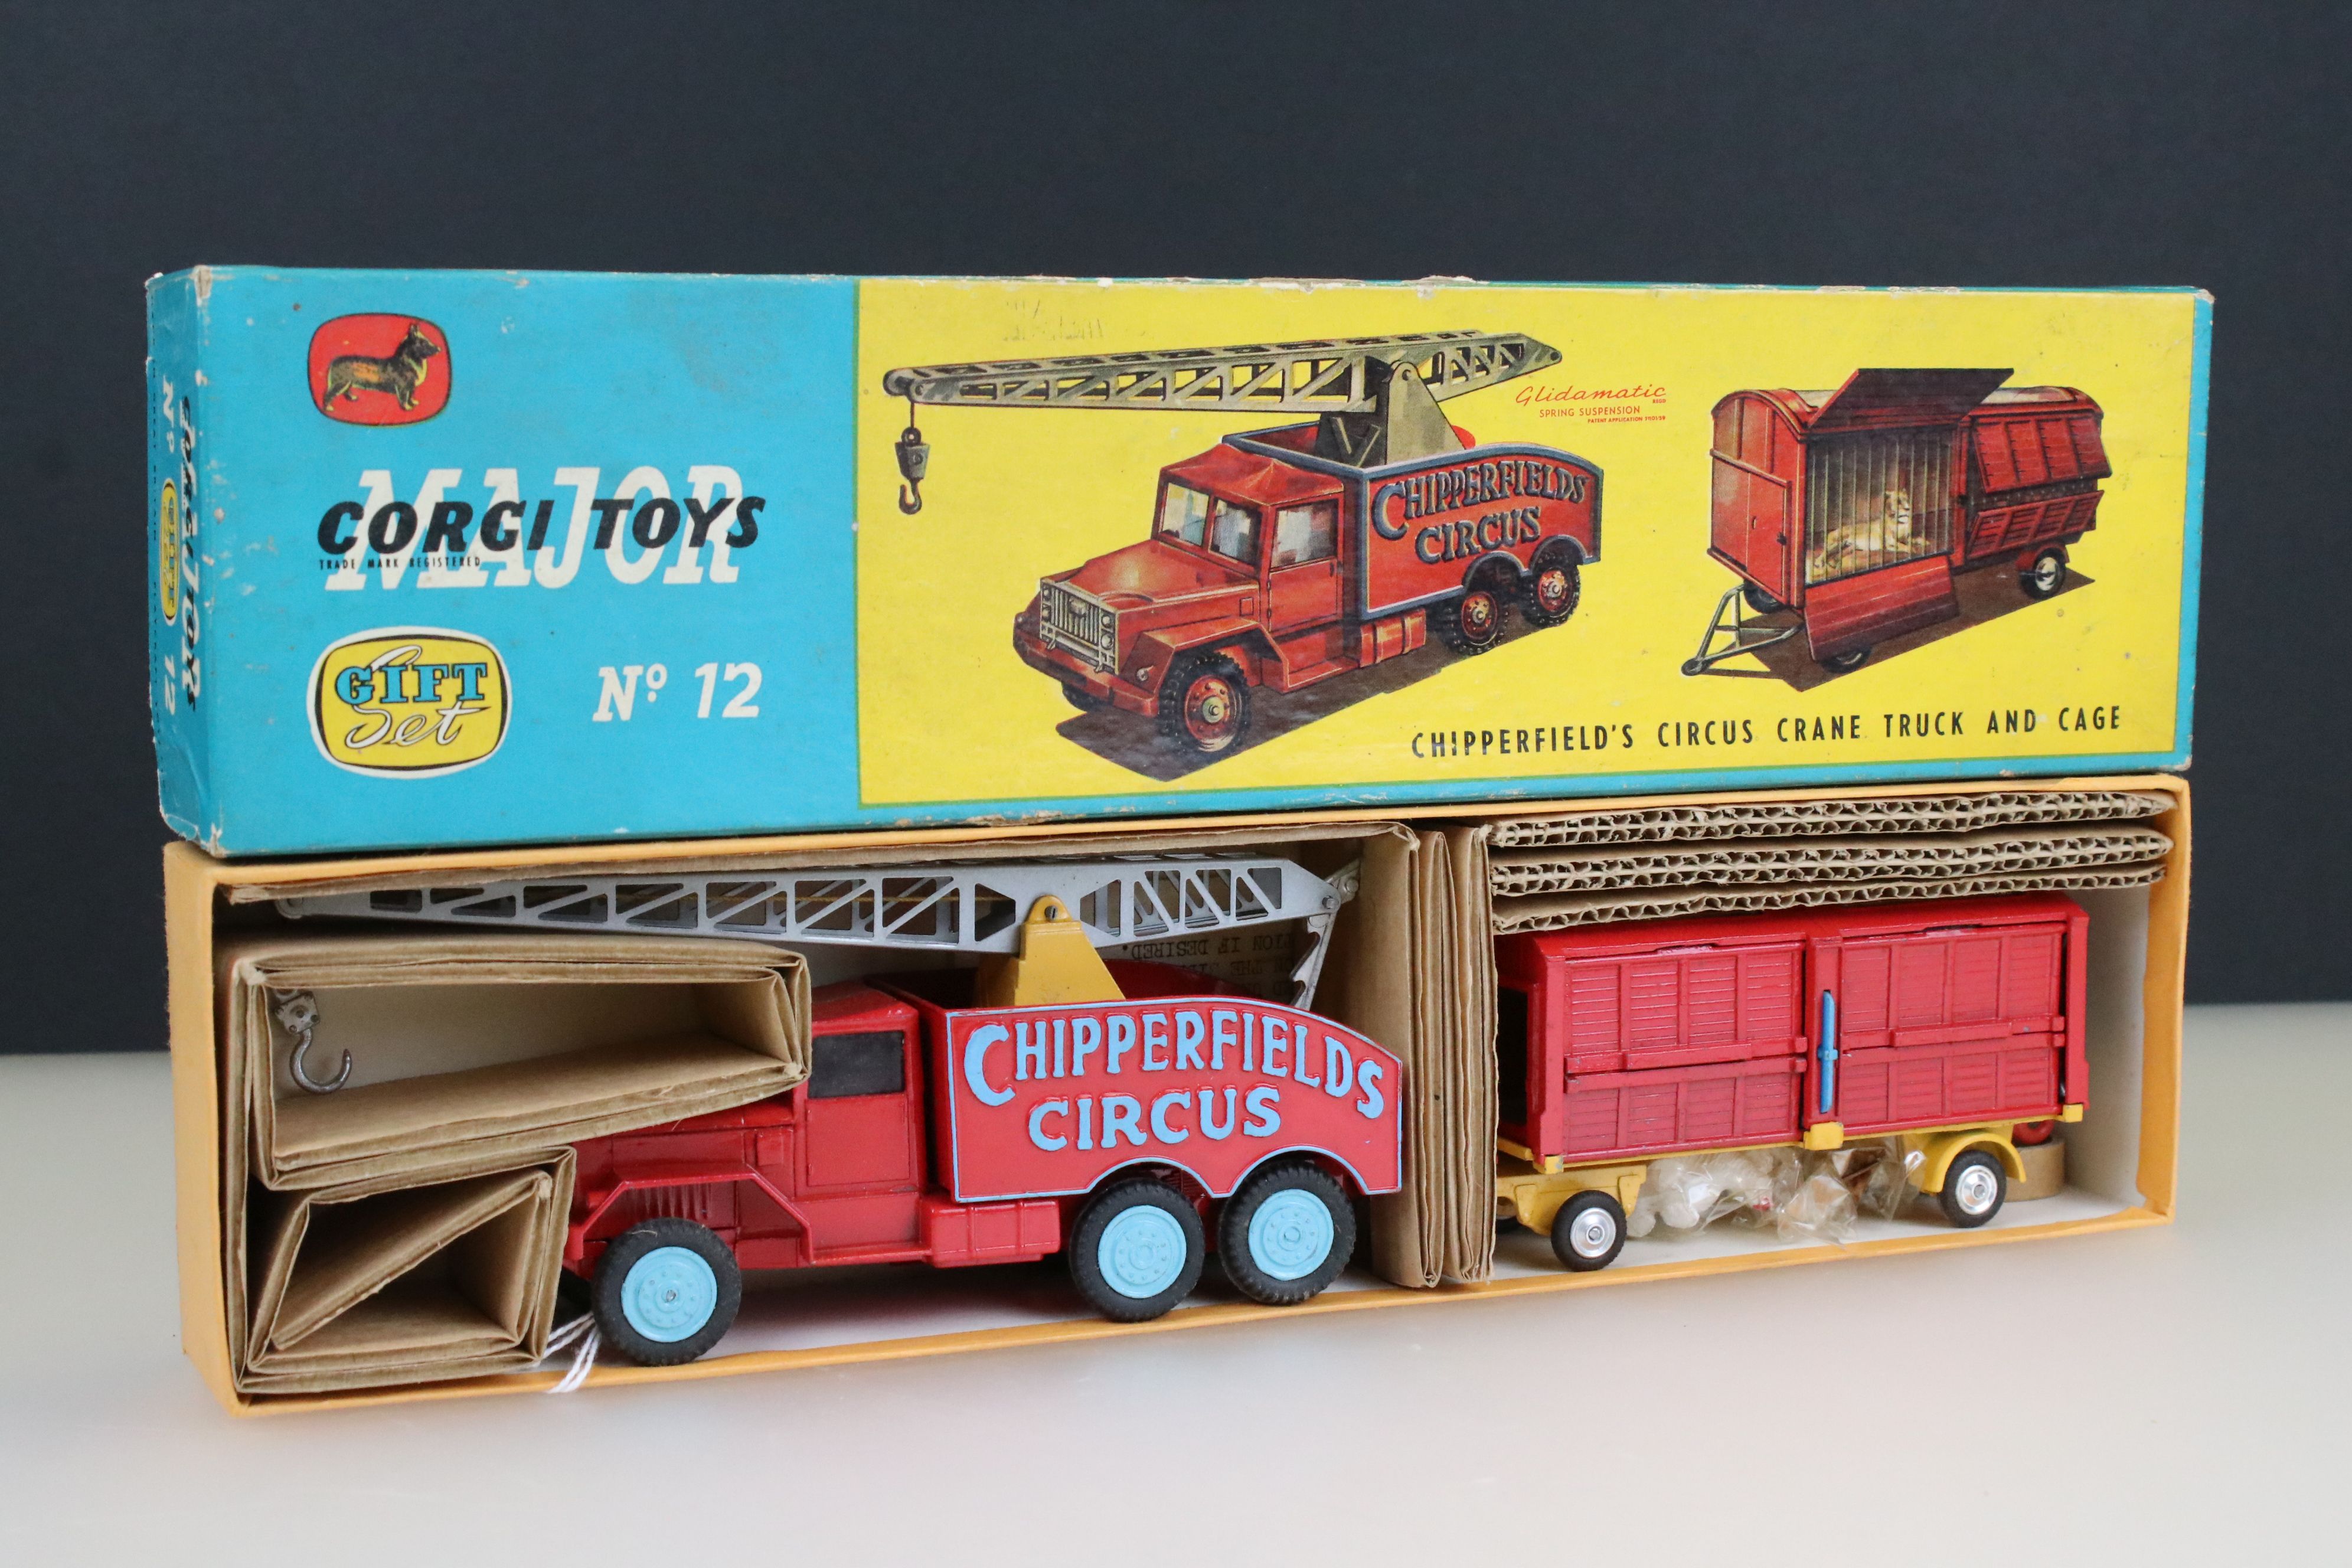 Boxed Corgi Major Gift Set No. 12 Chipperfields Circus Crane Truck and Cage in excellent condition